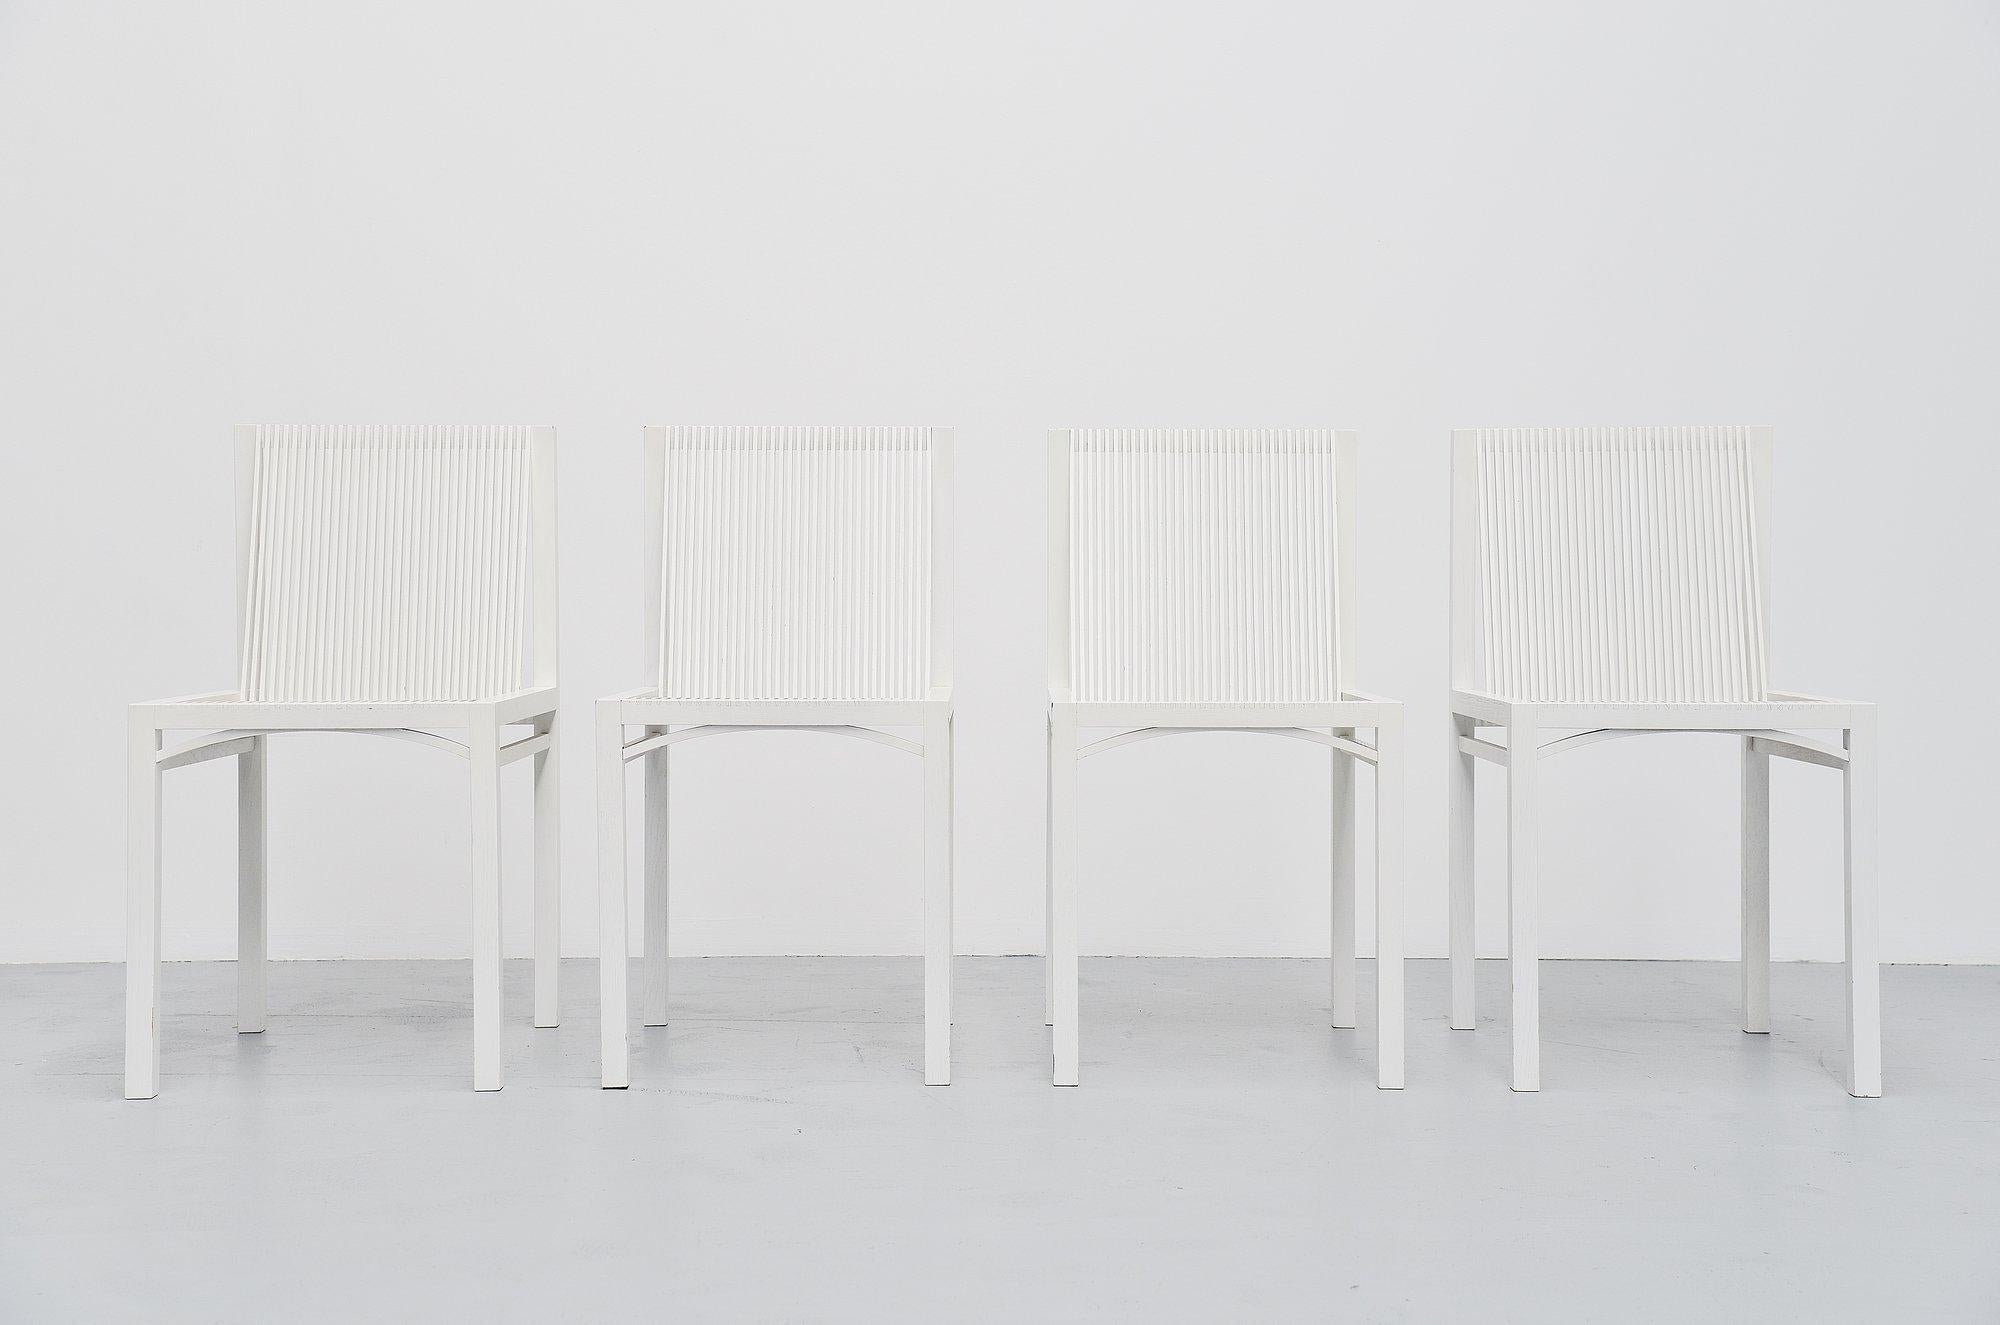 Very nice dining set of 4 dining chairs designed by Ruud Jan Kokke and manufactured by Metaform, Holland 1984. The chairs are made of white lacquered birch wooden slats, glued and joint without screws or nails. The chairs have a very nice structural